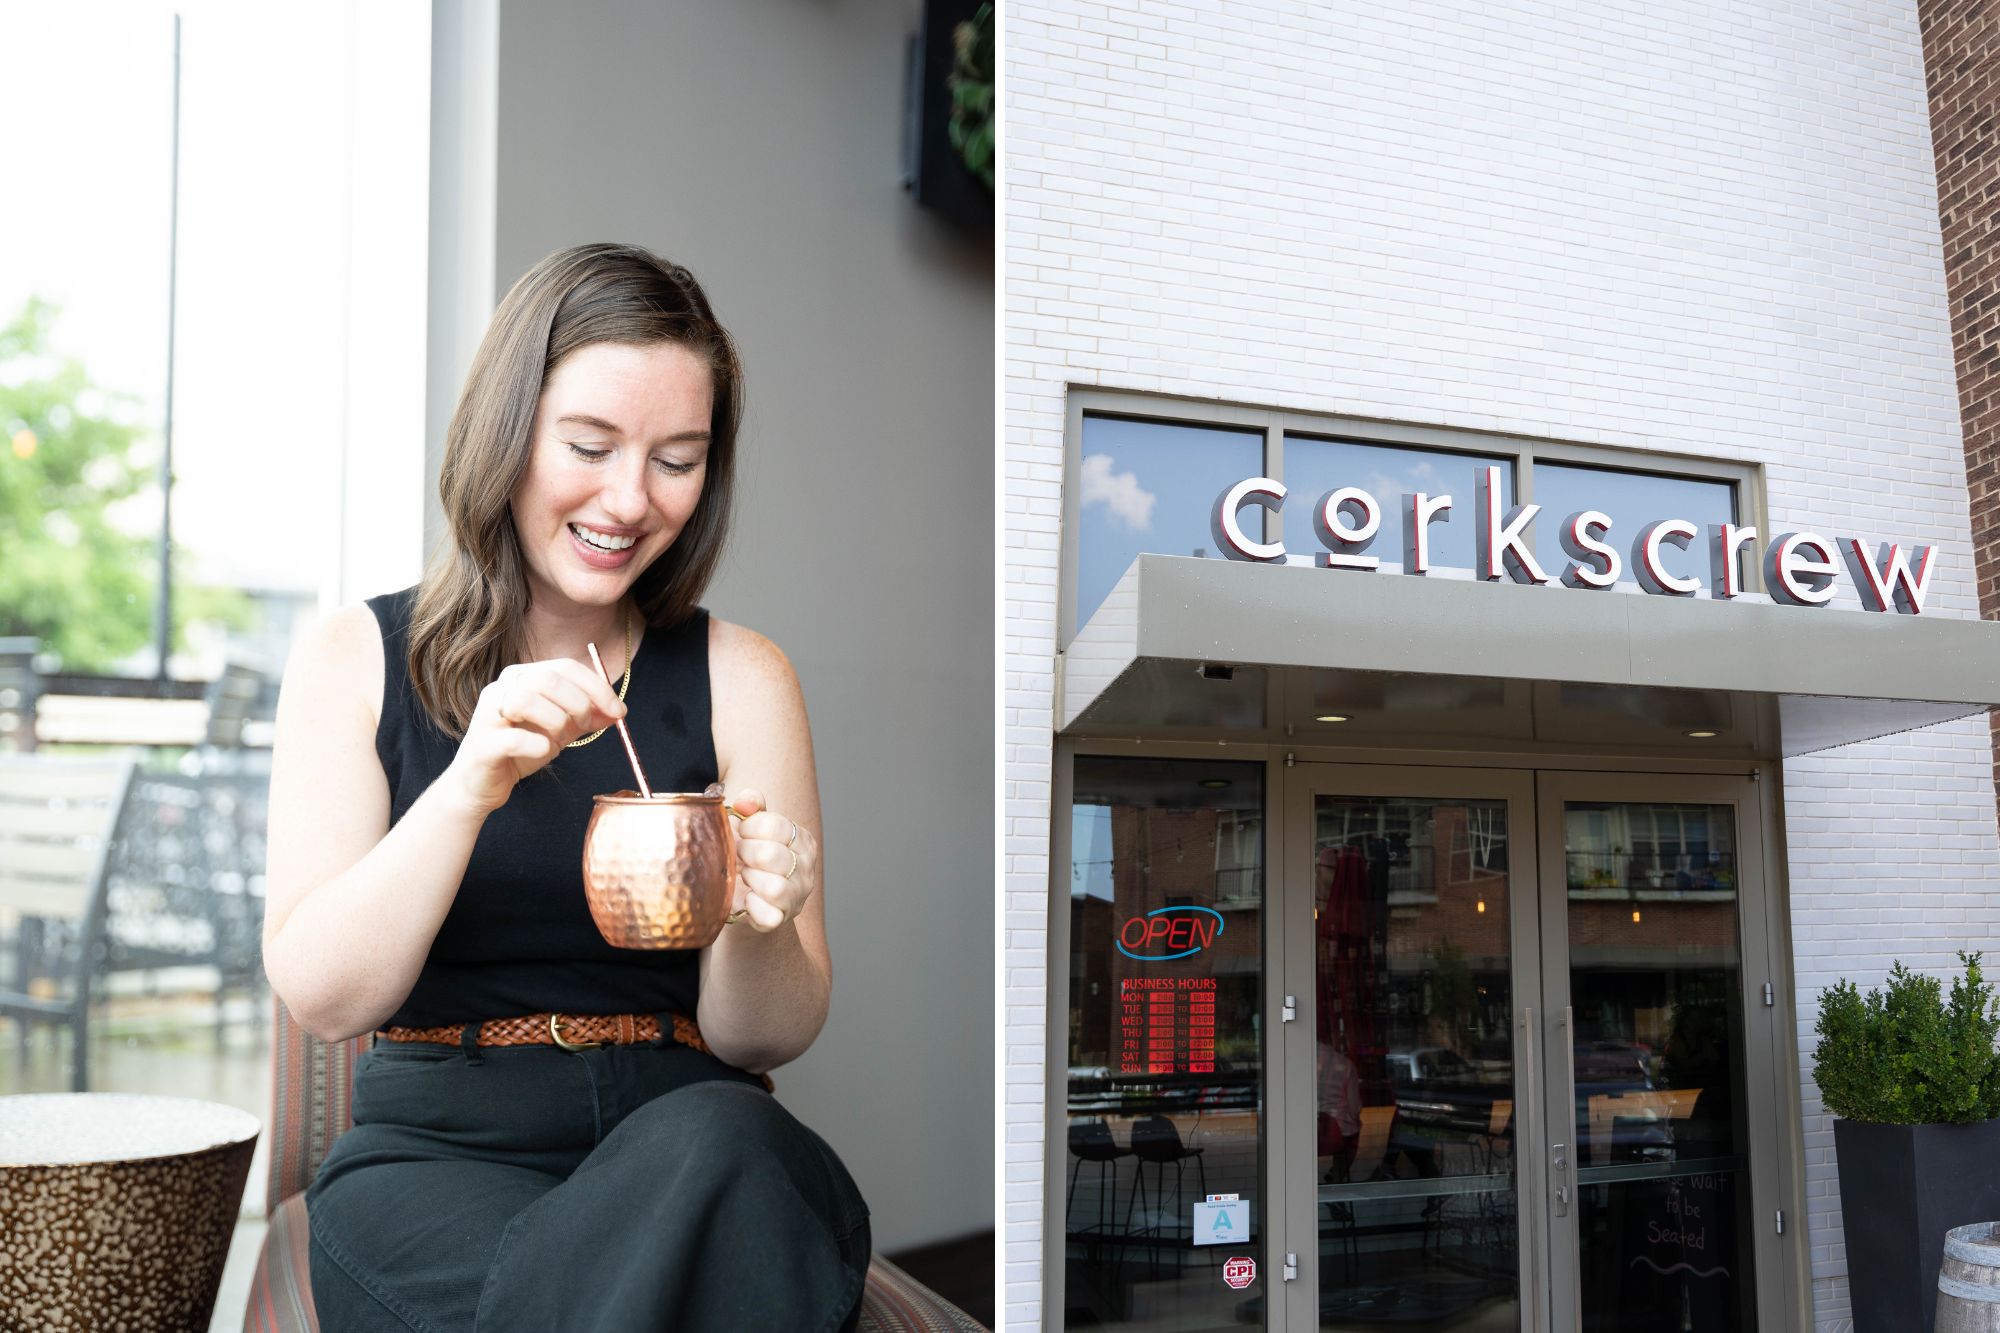 Two images: Alyssa smiling and holding a Mule mug, and the exterior of Corkscrew